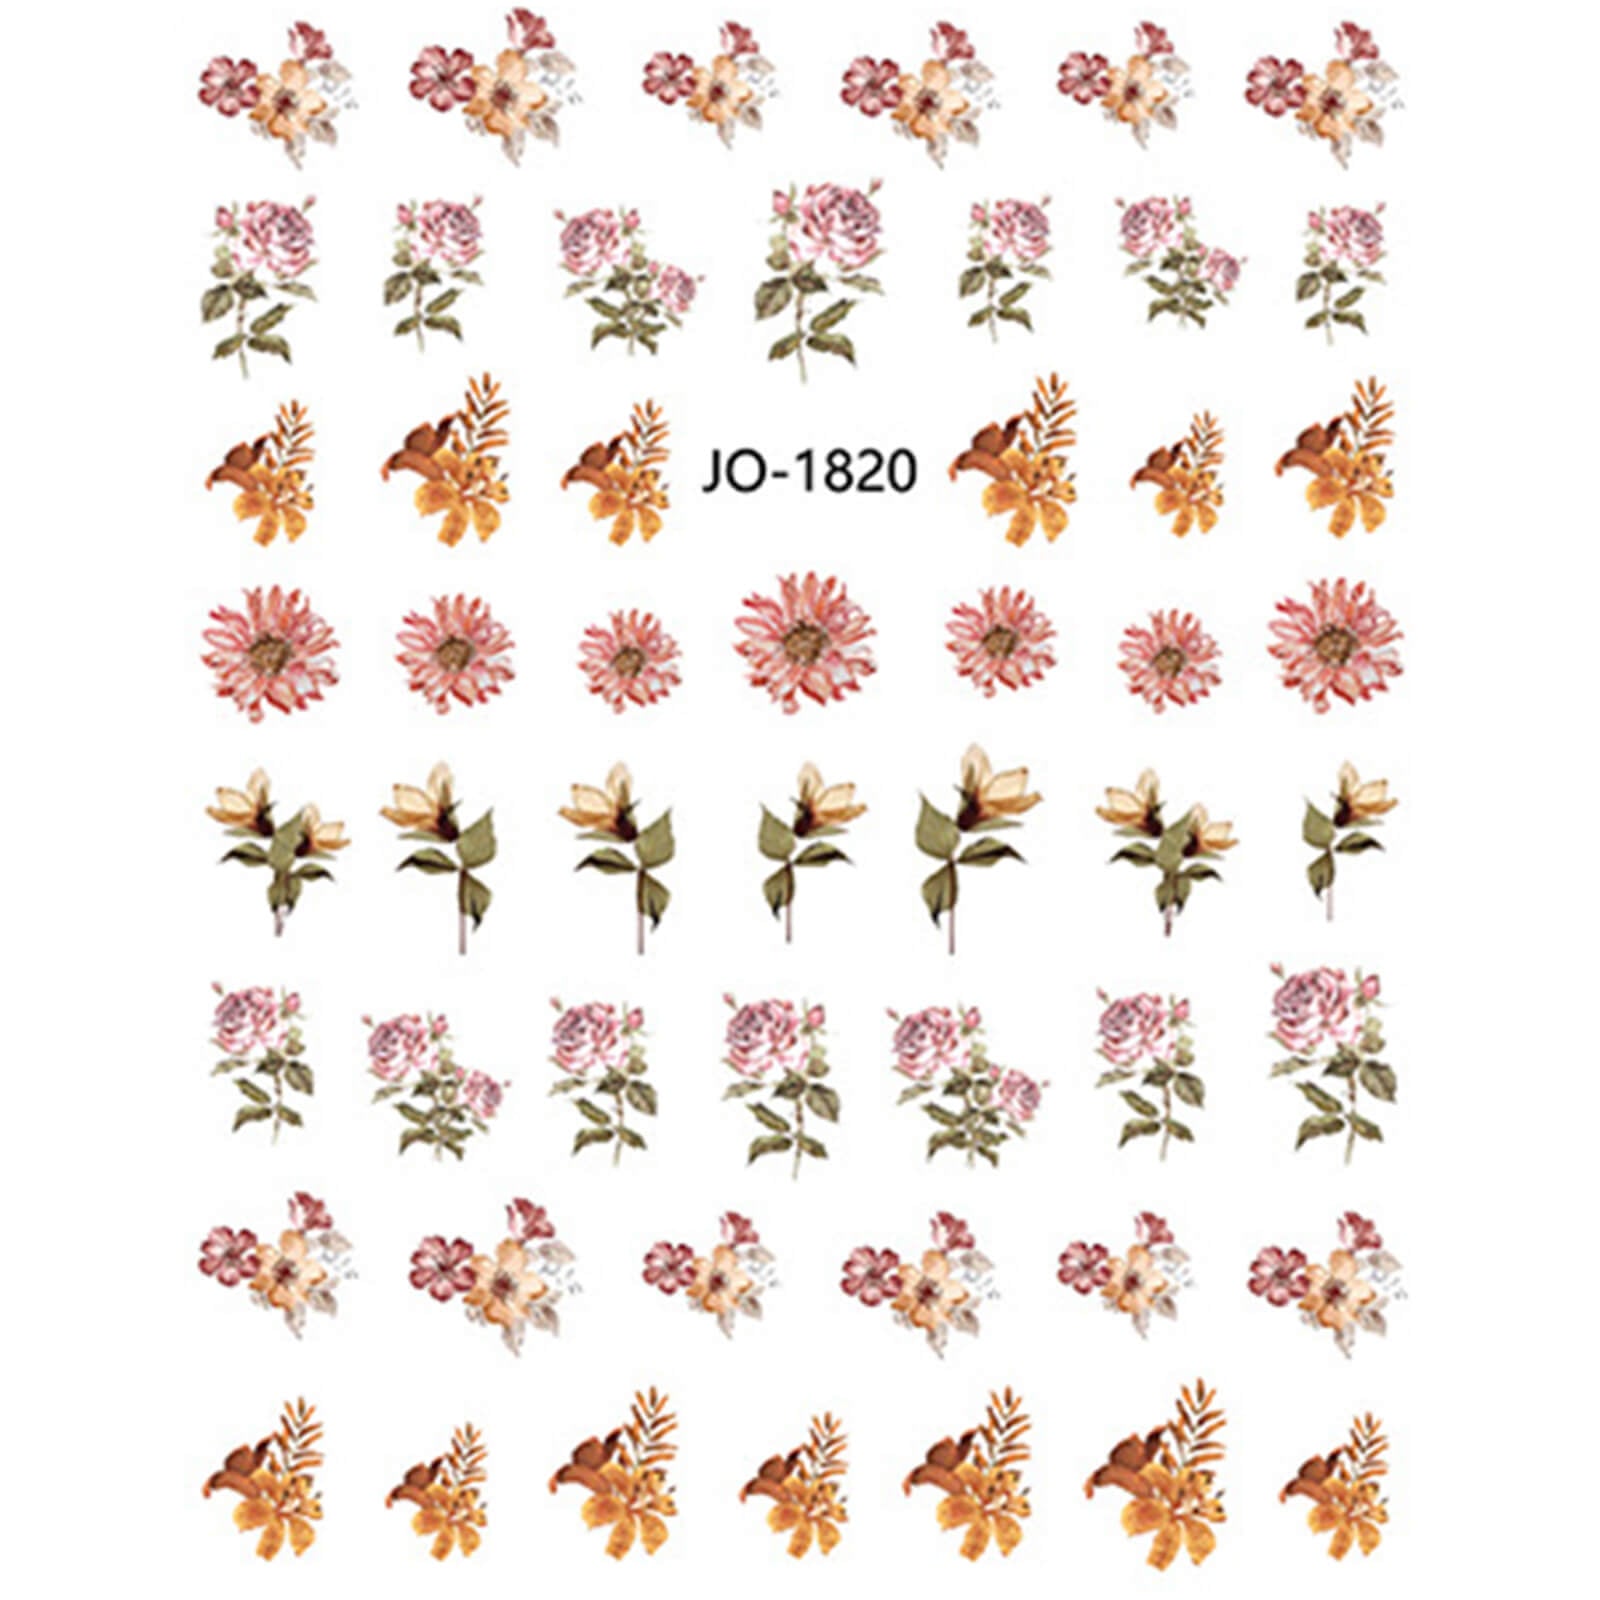    nail-art-stickers-dried-flower-1820